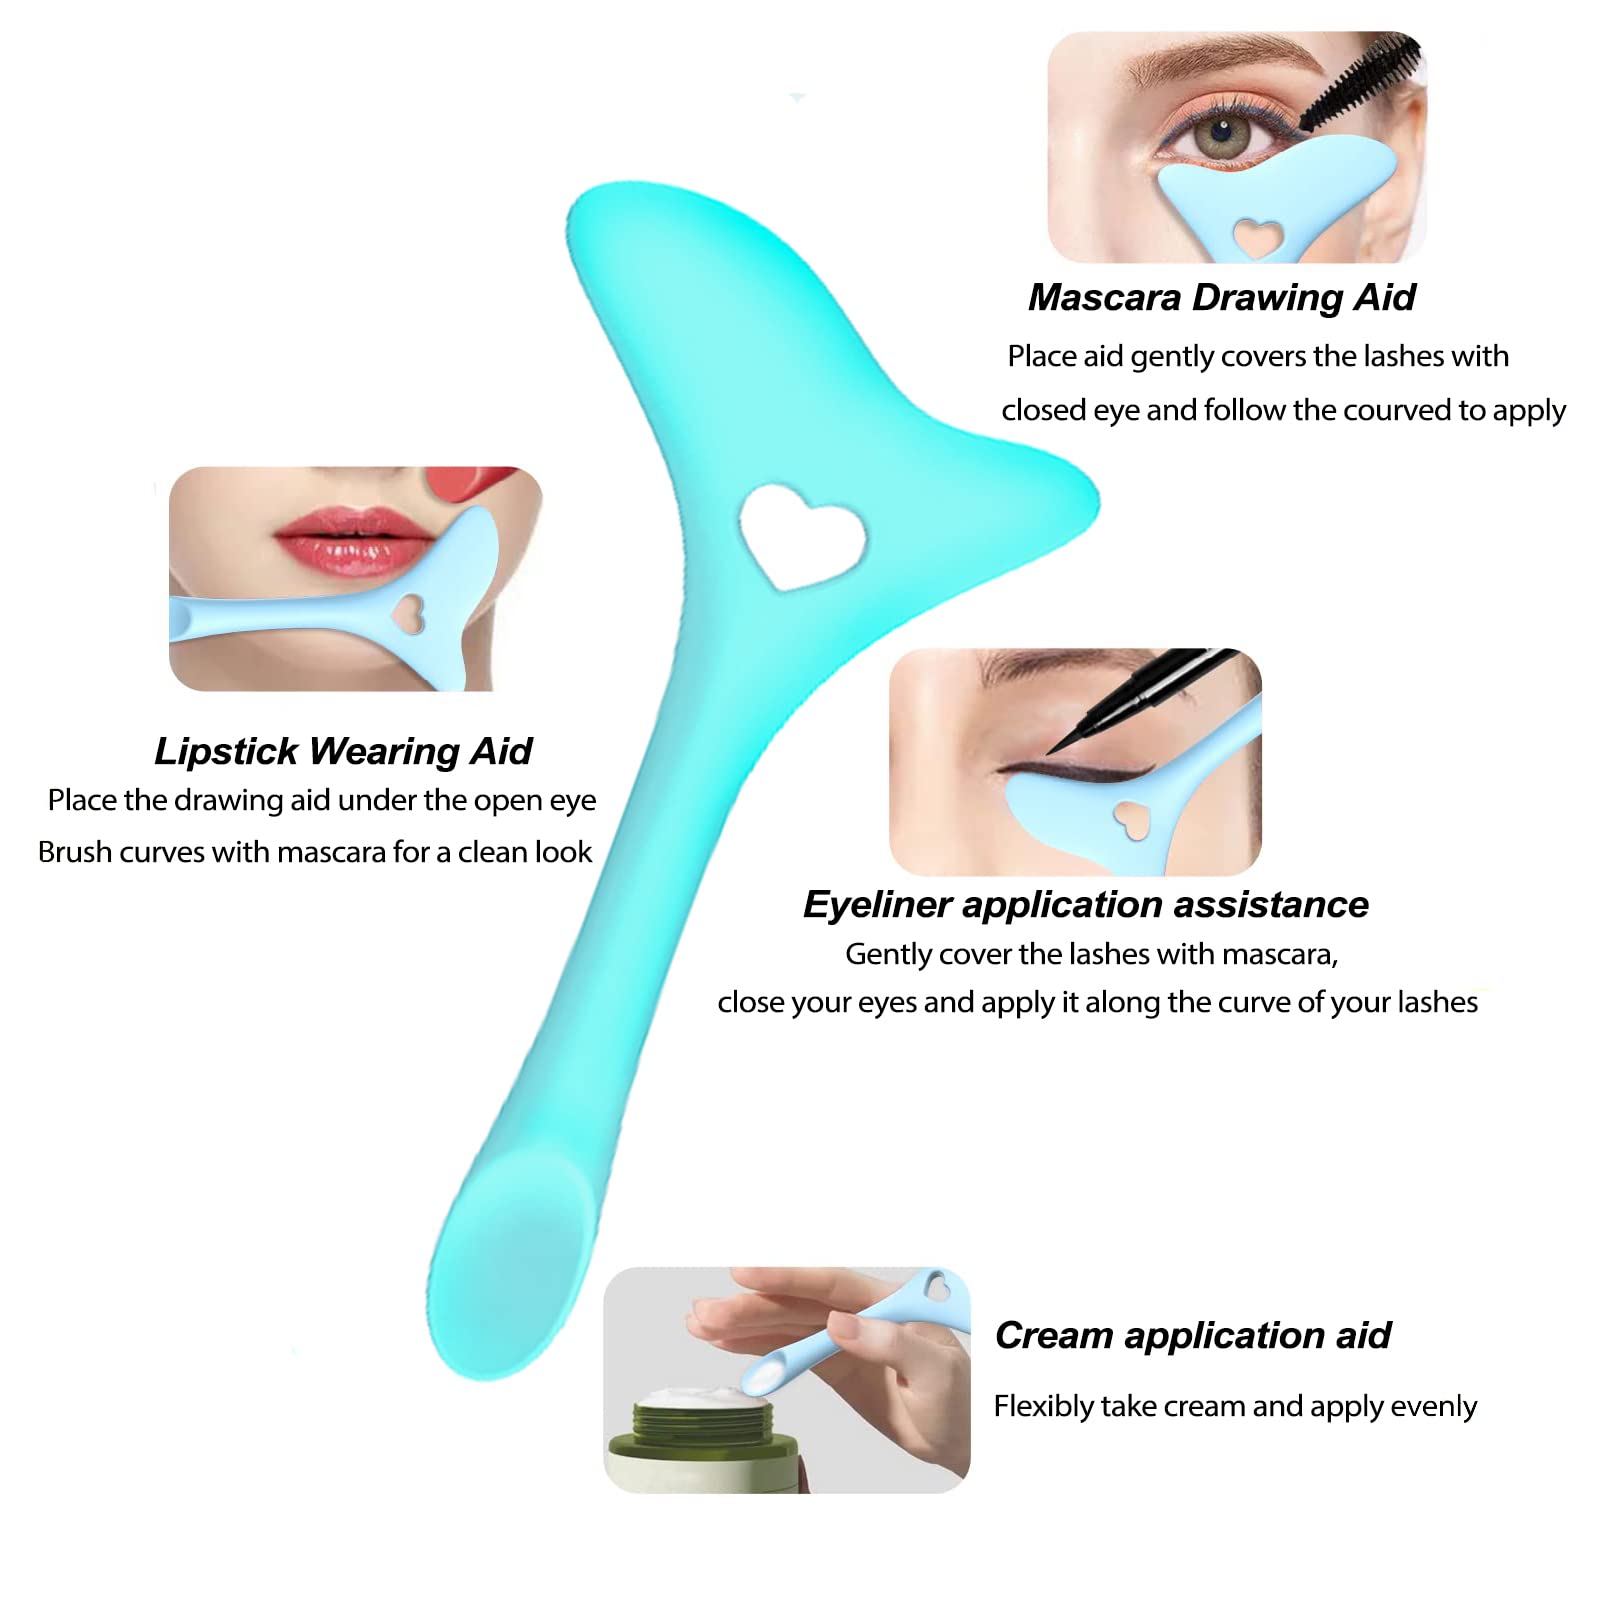 Winged Eyeliner Stencil, Eye Makeup Aid Tool, Reusable Silicone Eye Makeup Assistant Tool, Multi-Purpose Winged Eyeliner for Eye, Eyeliner Stencils for Eyes. (Blue)